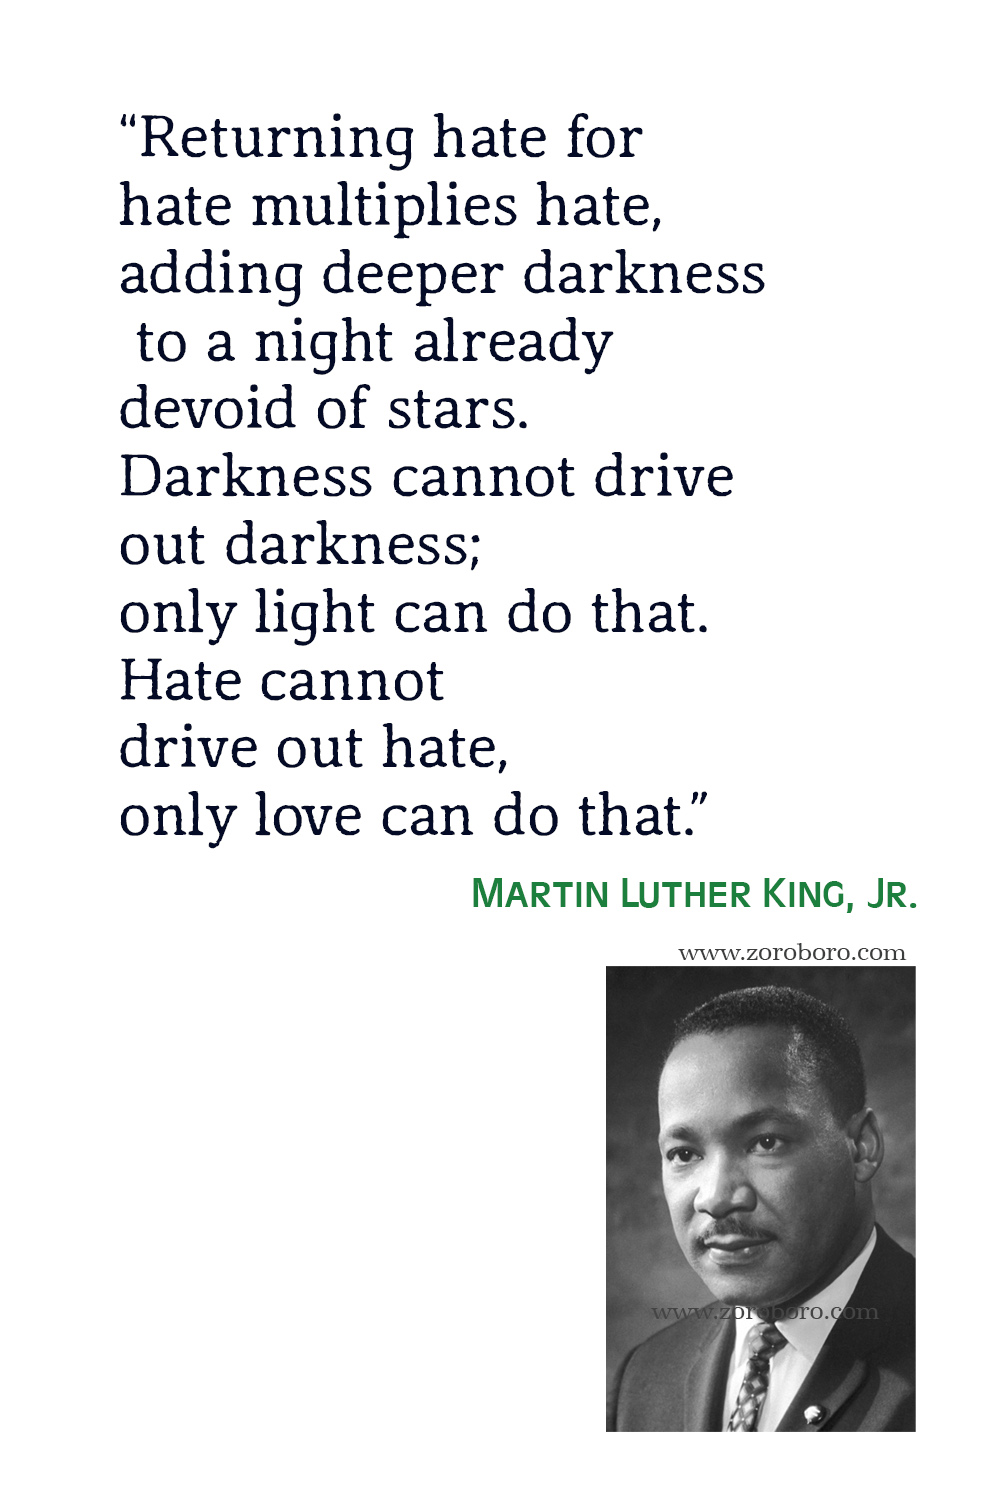 Martin Luther King Jr. Quotes, Martin Luther King Jr. Courage, Inspirational, Kindness, Leadership, Success Quotes, Martin Luther King Jr.